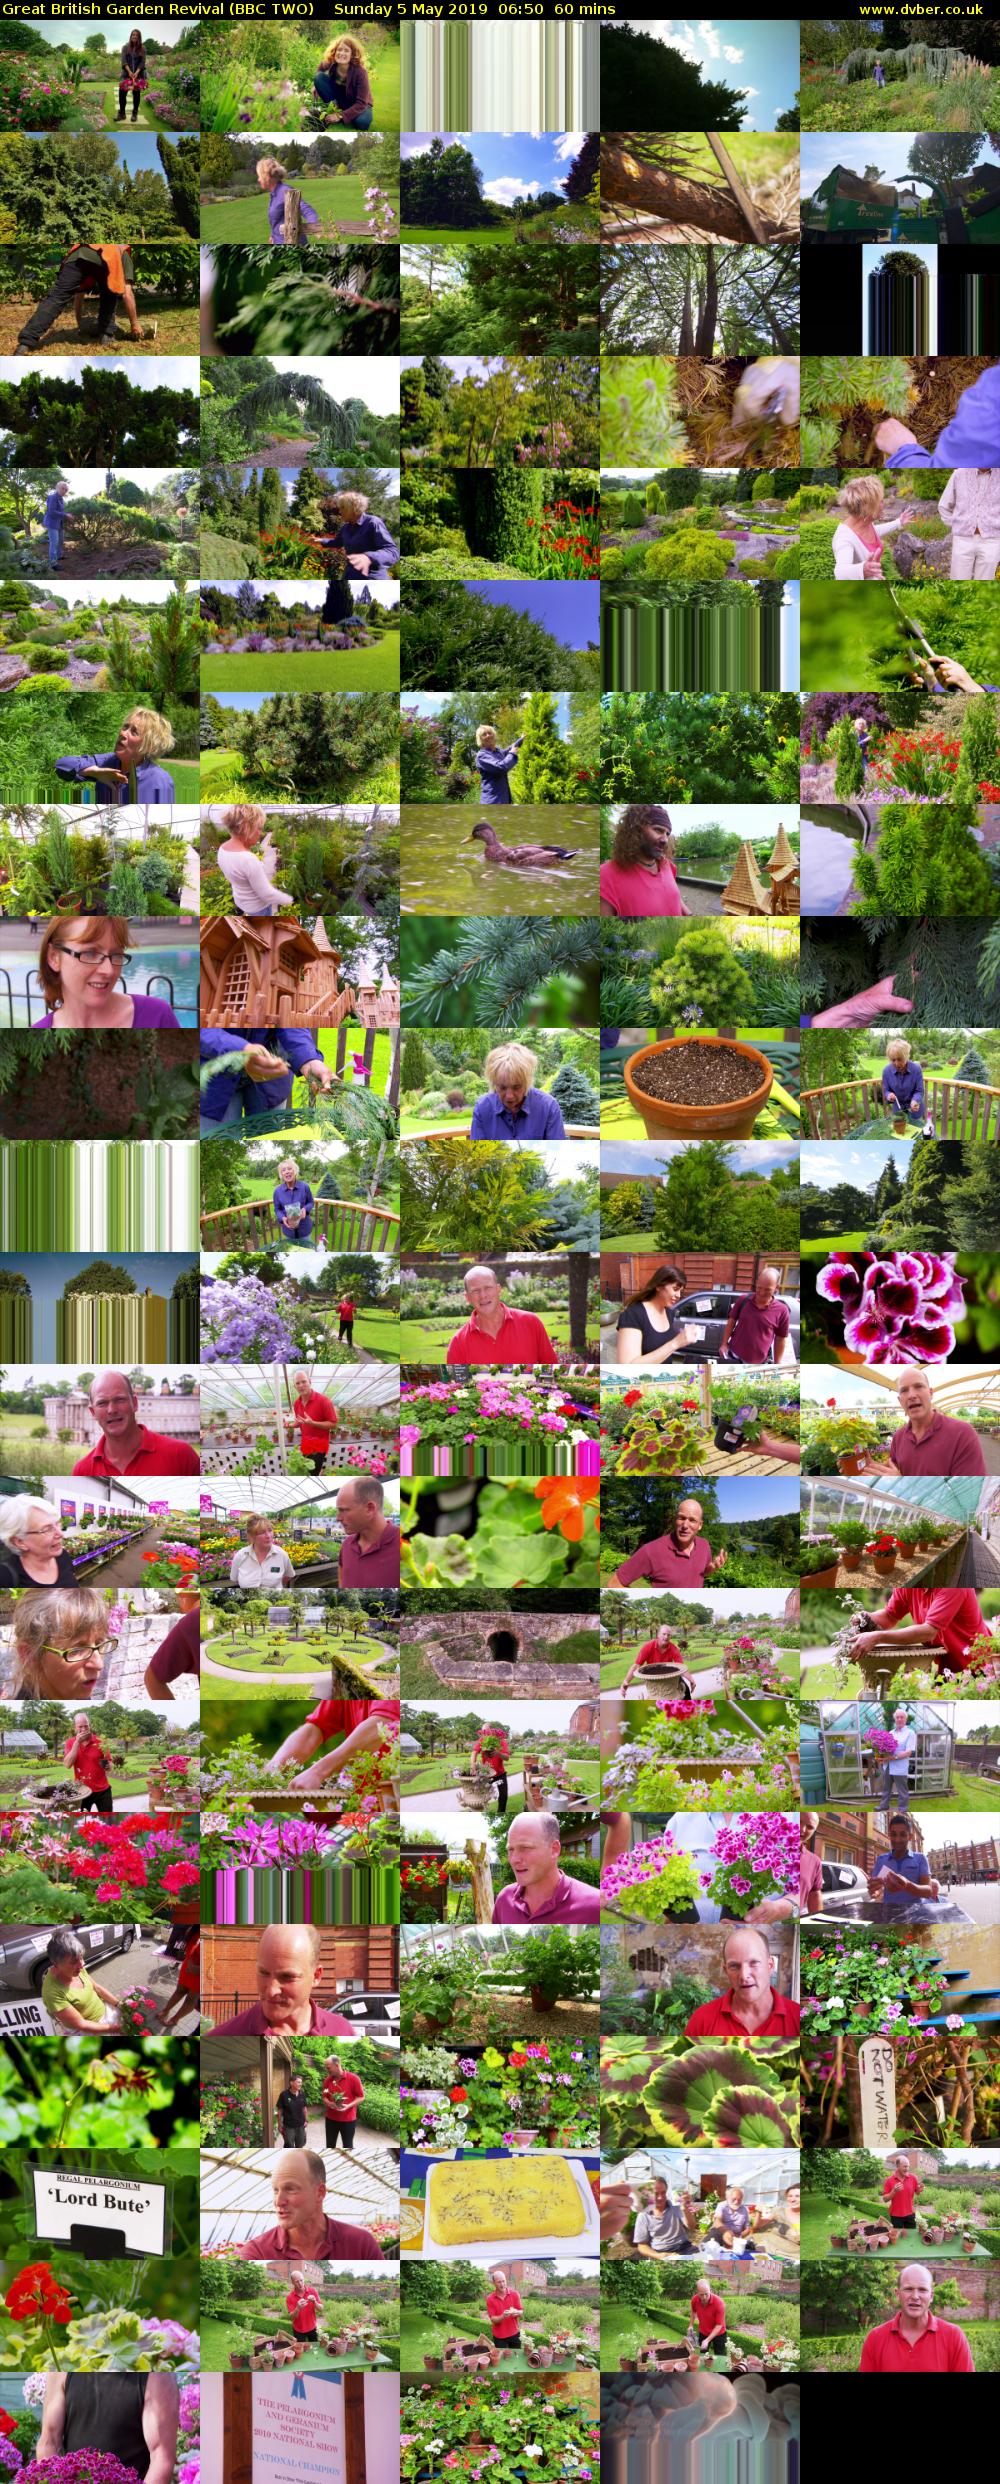 Great British Garden Revival (BBC TWO) Sunday 5 May 2019 06:50 - 07:50